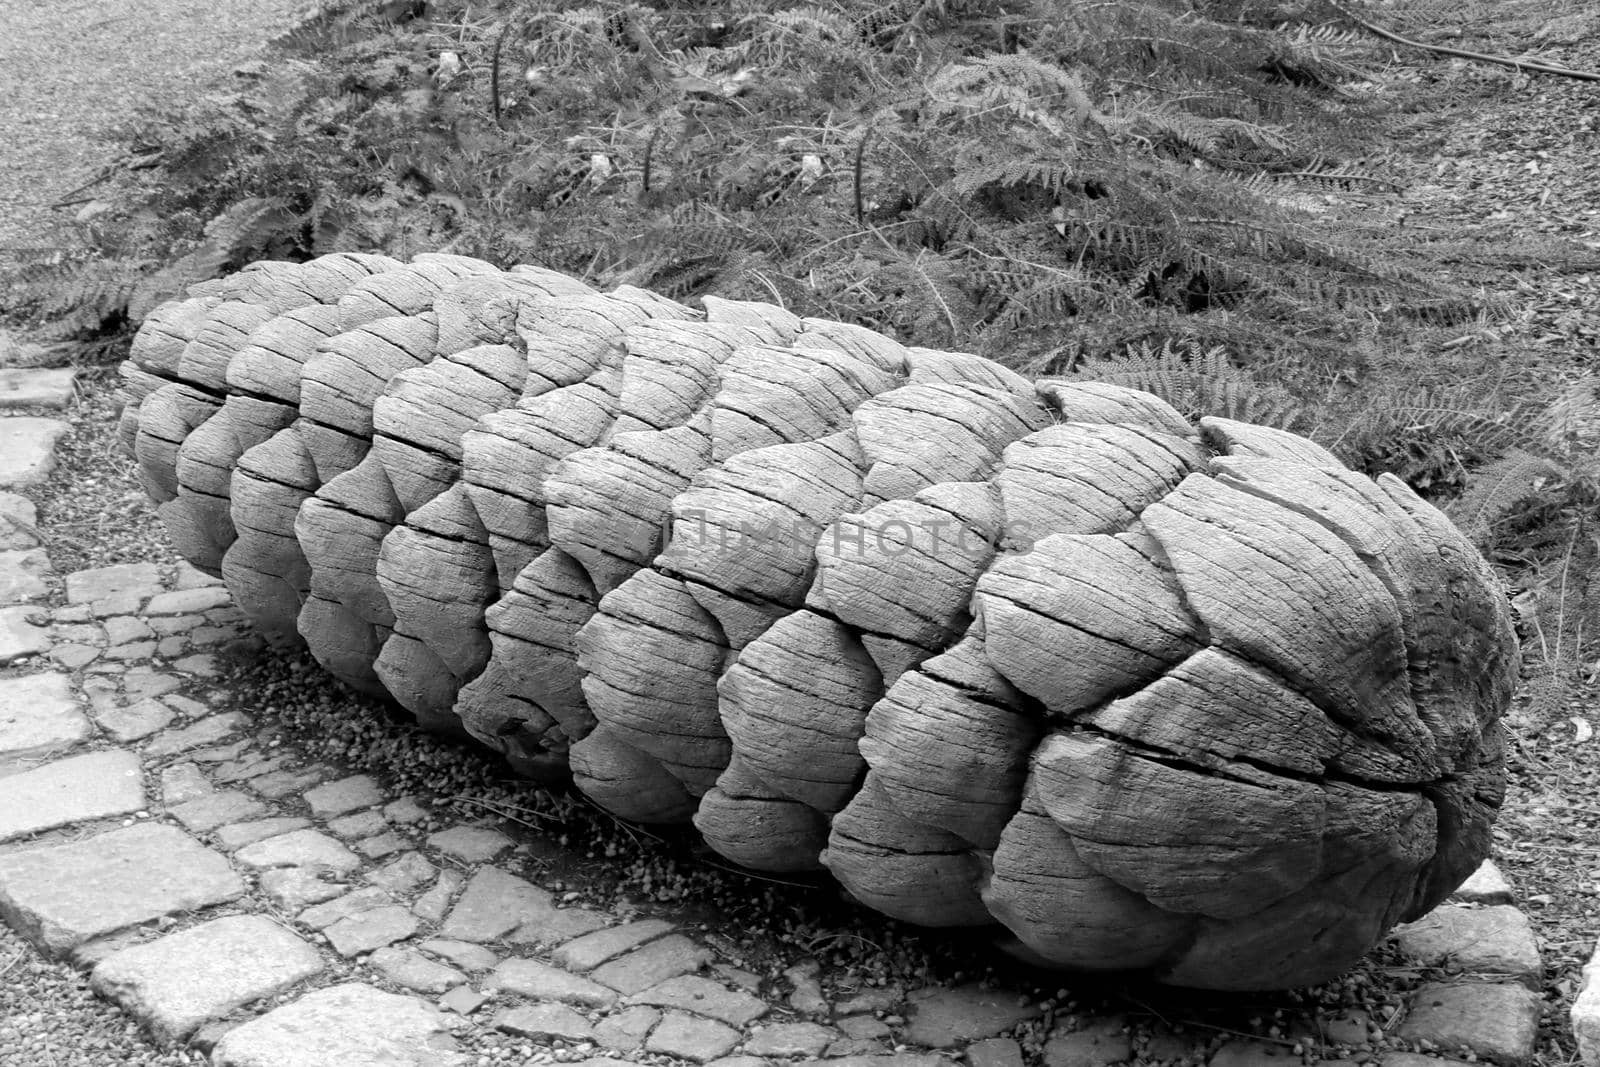 Black and white photo, a large cone of wood. by kip02kas